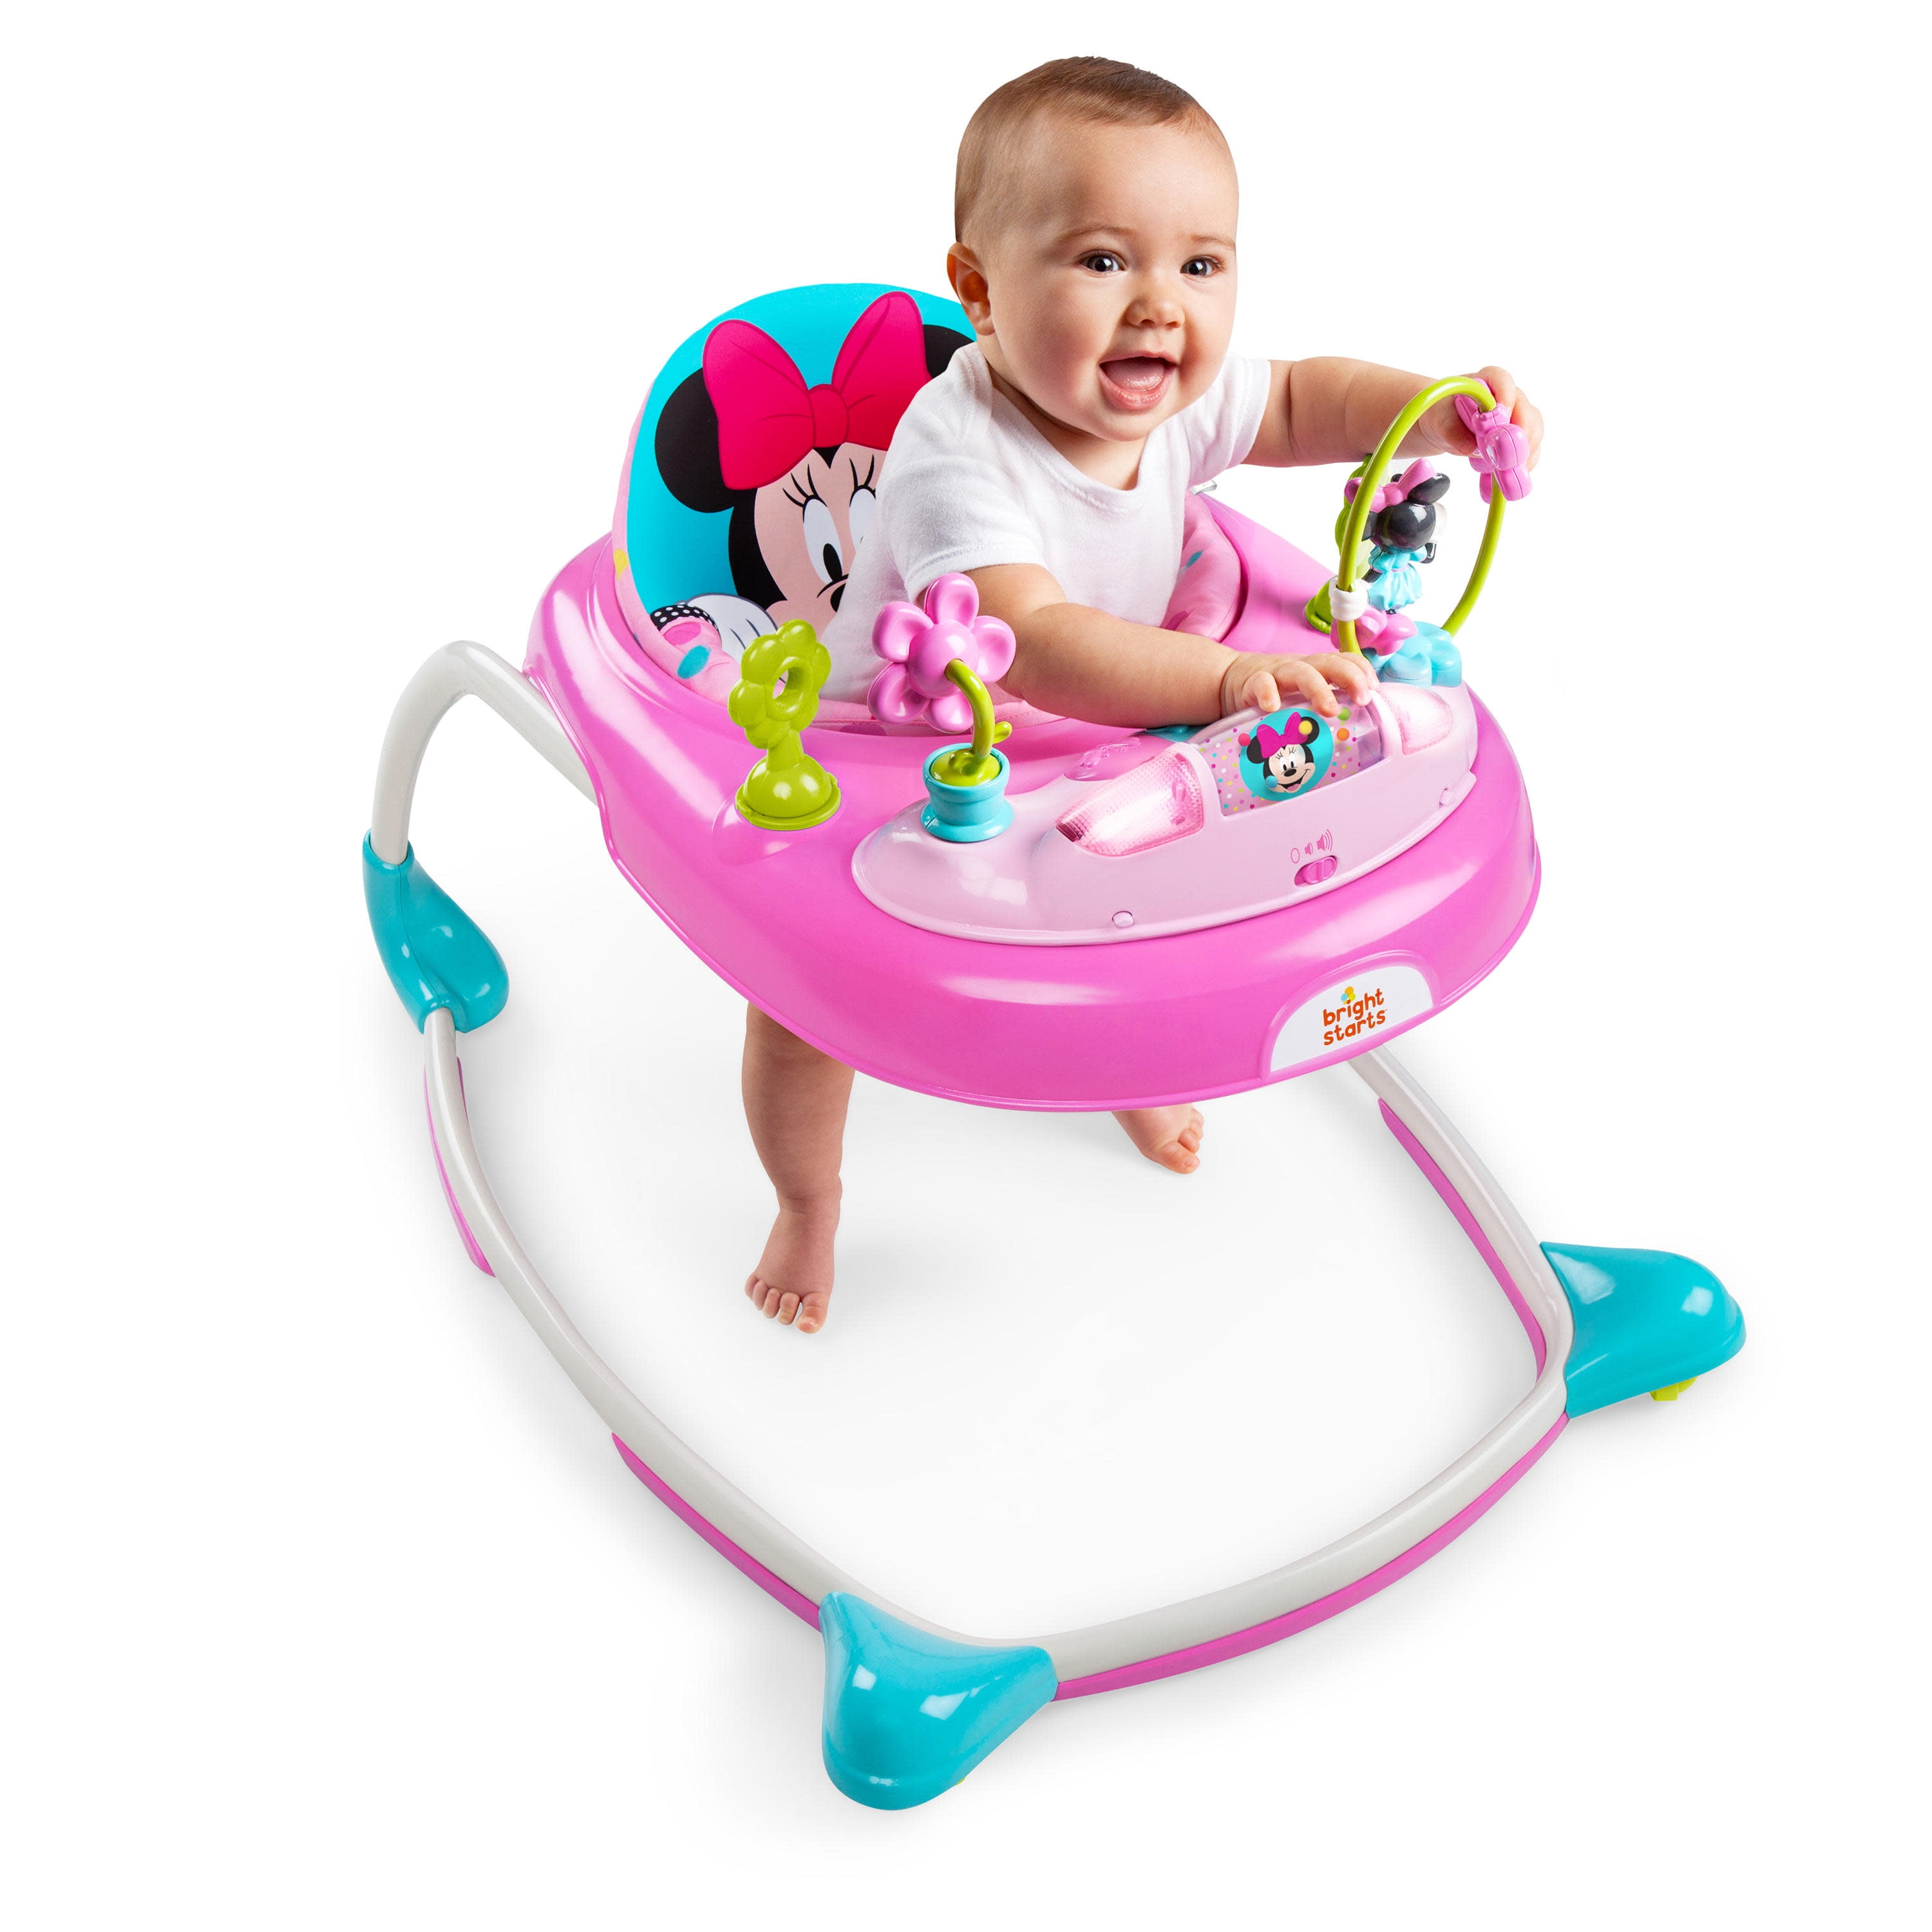 walker for 7 month old baby